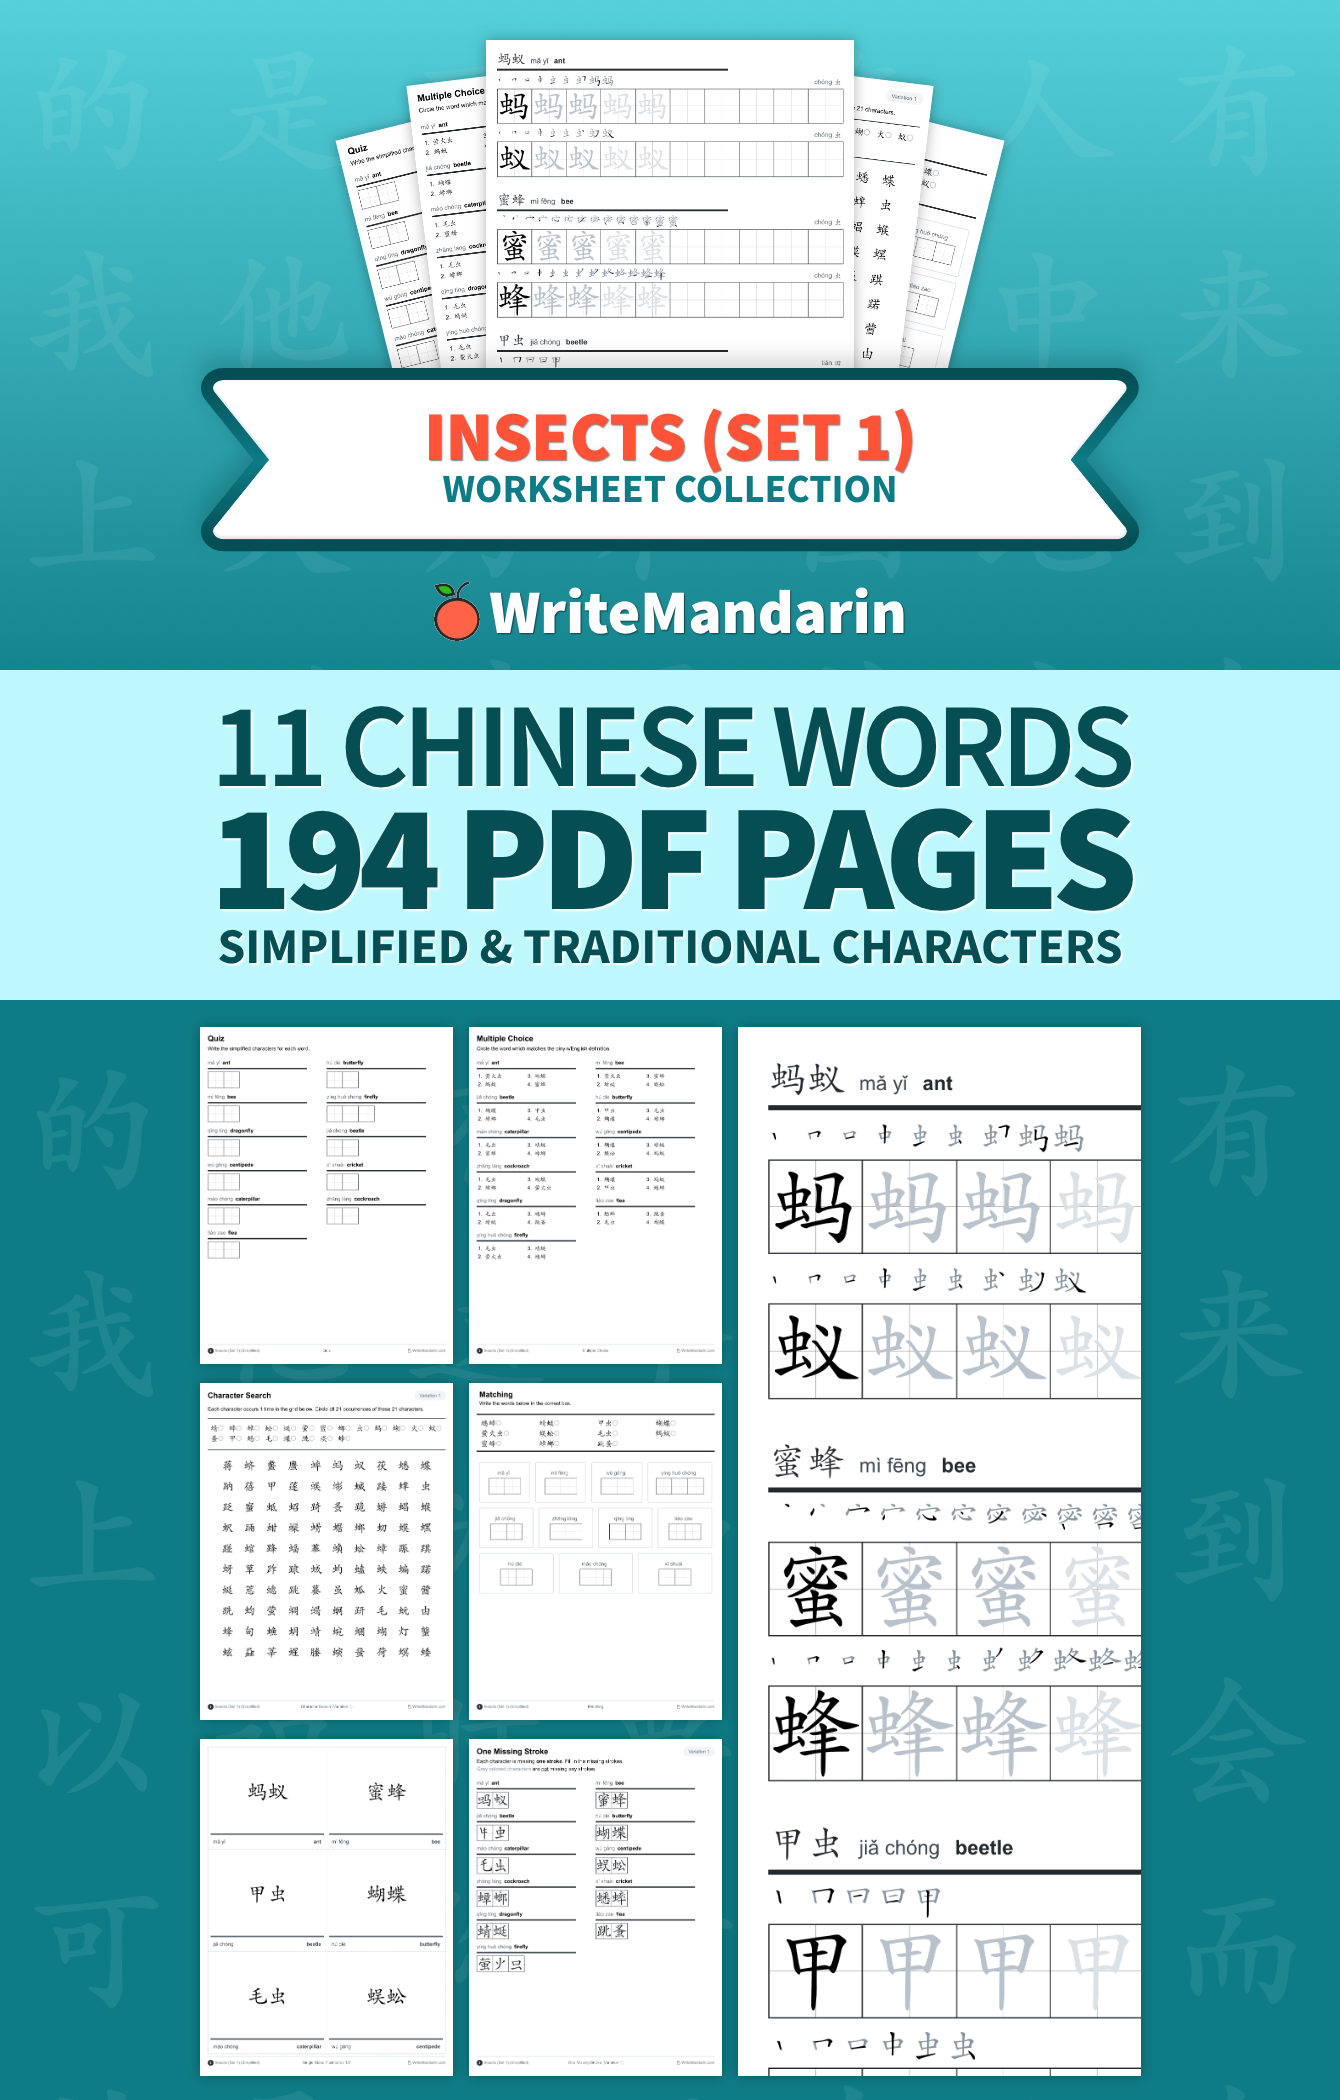 Preview image of Insects (Set 1) worksheet collection